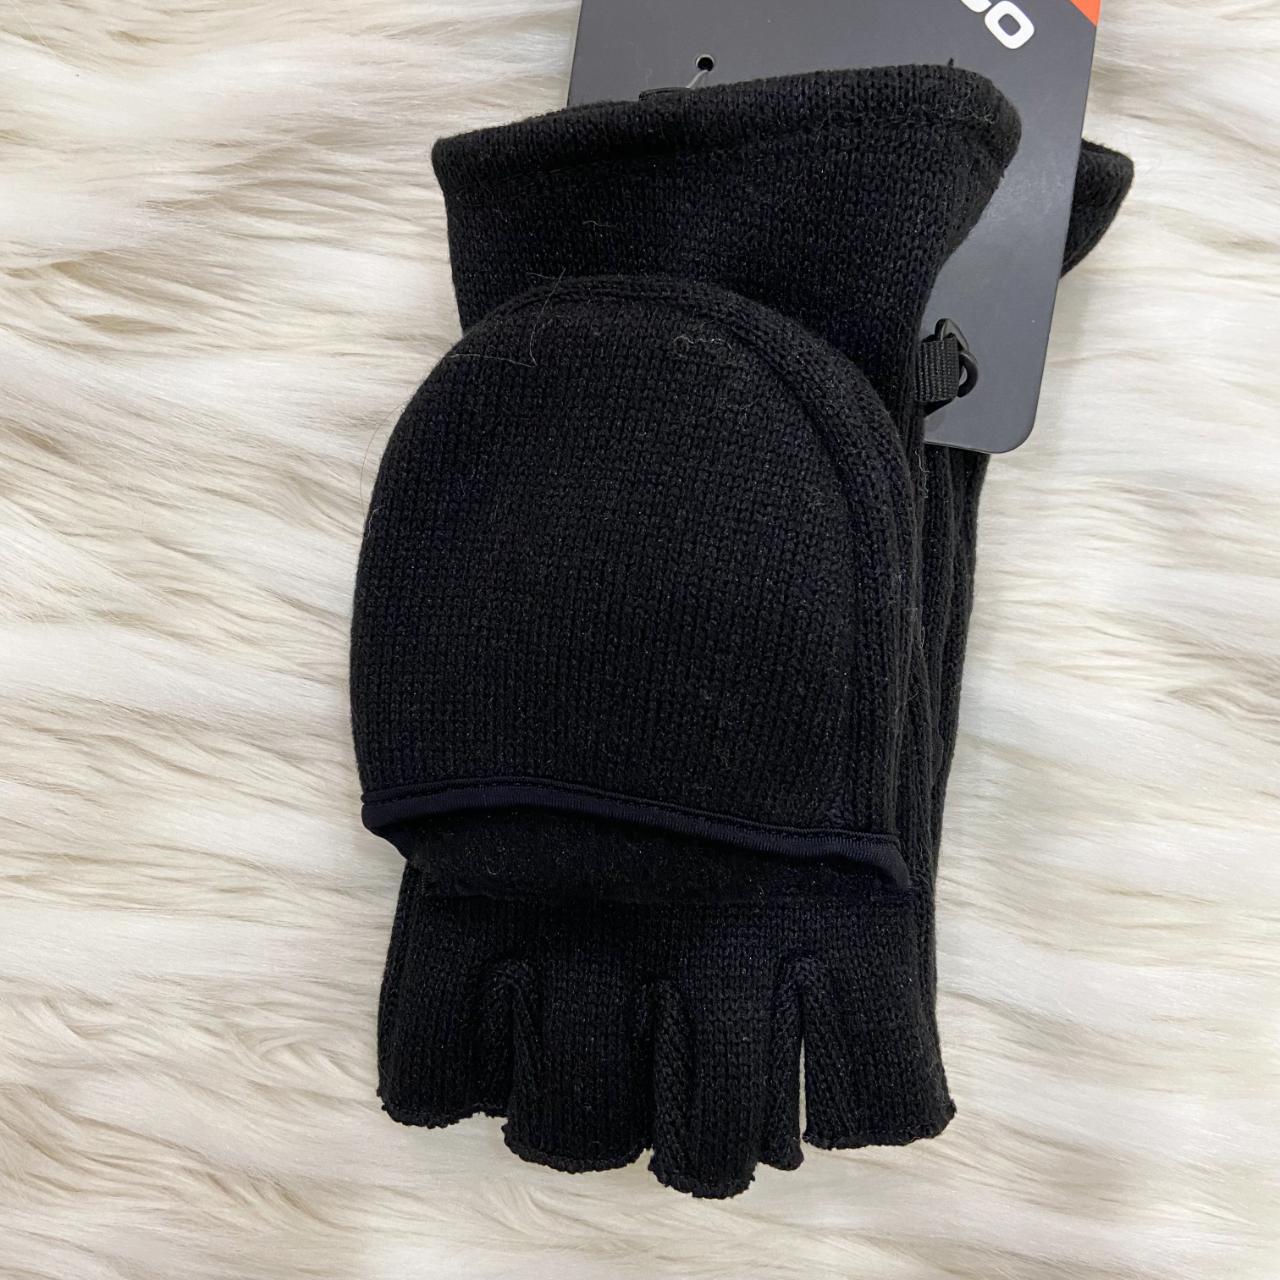 Product Image 2 - WARM WINTER GLOVES

These Hawke &